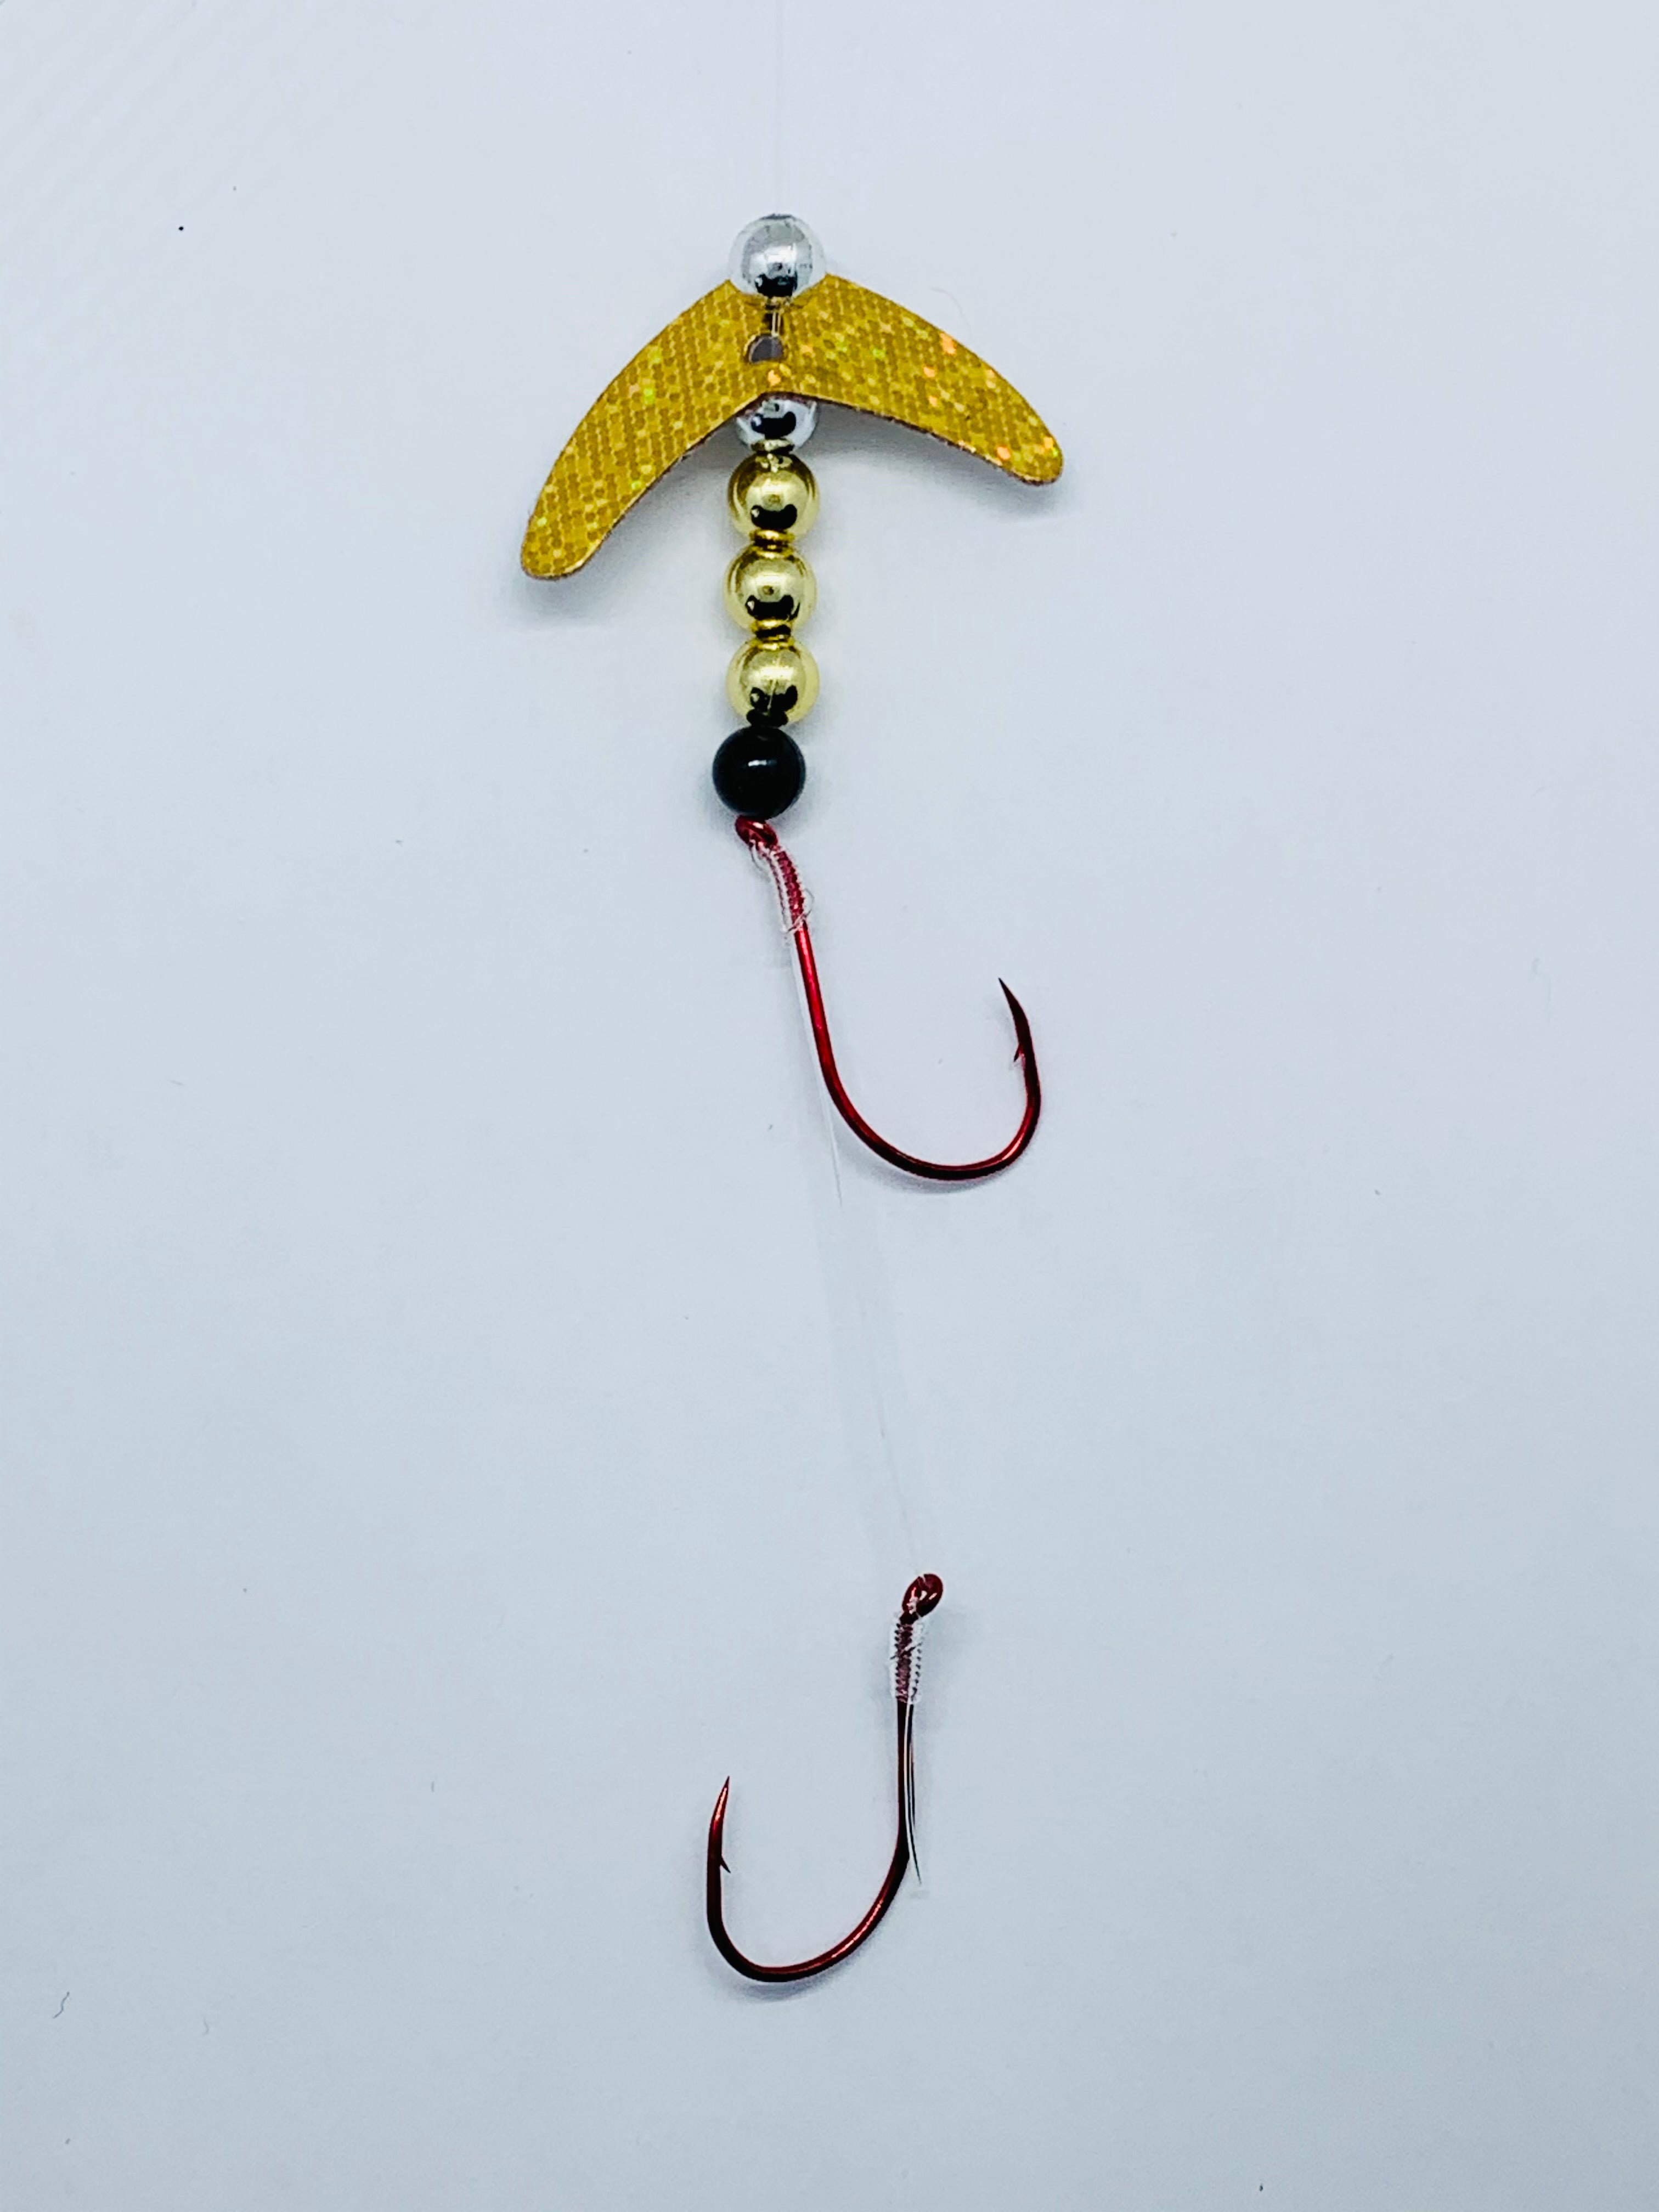 1.5 Smile blade harness with double octopus hooks - Epic Fishing